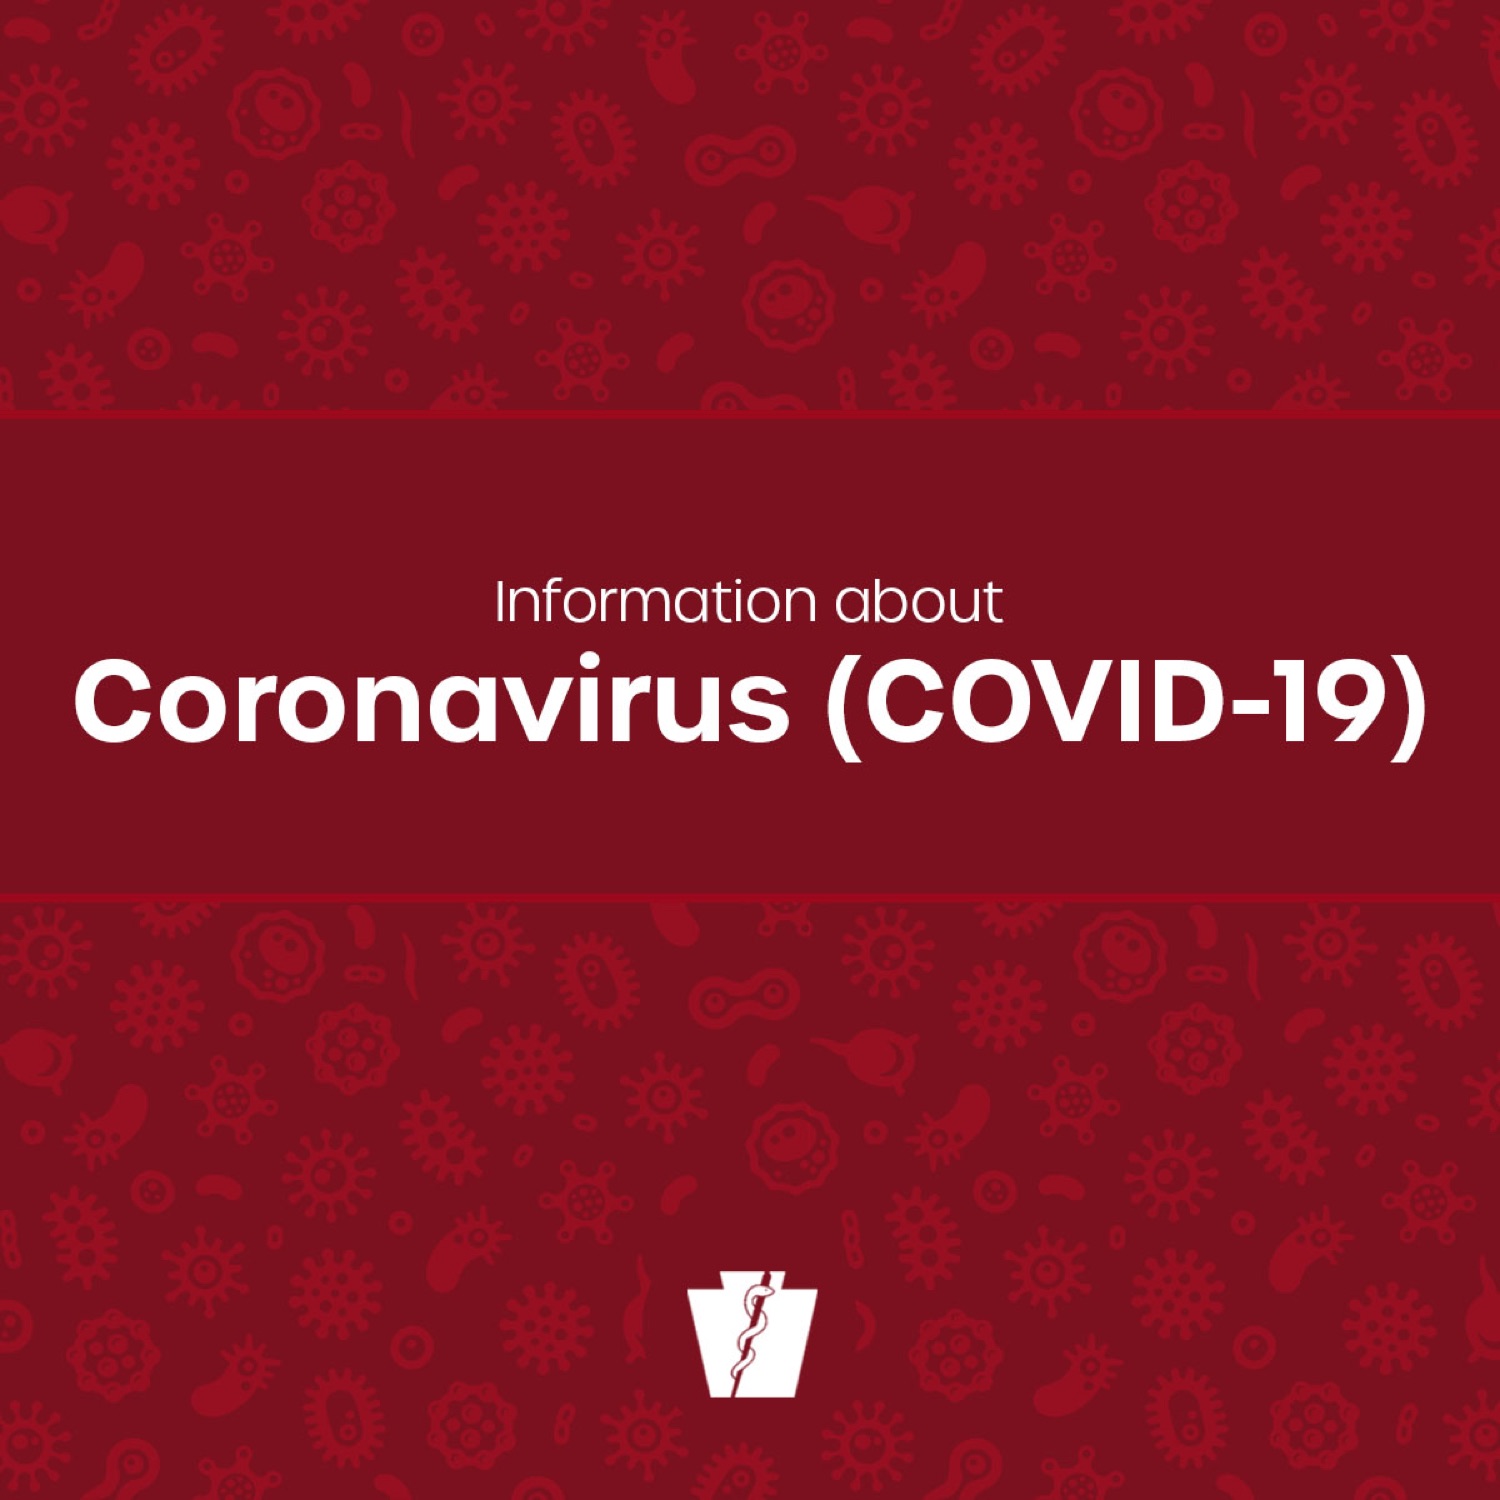 Covid-19 Outreach: Facebook Graphic<br><a href="https://filesource.amperwave.net/commonwealthofpa/photo/17885_gov_Coronavirus_FB.jpg" target="_blank">⇣ Download Photo</a>